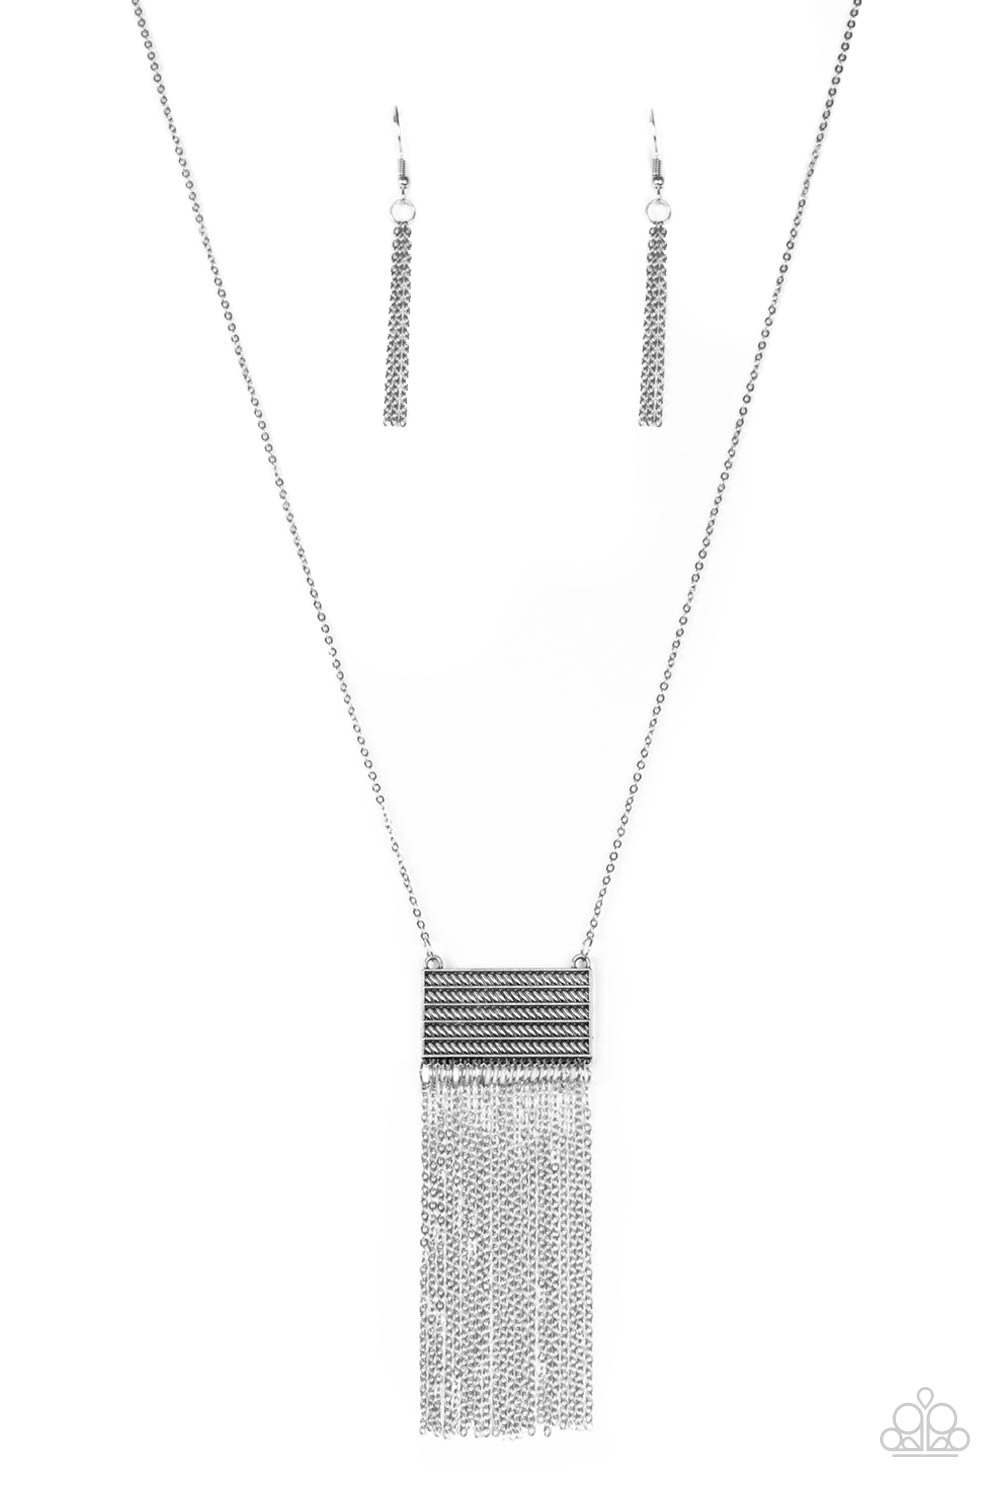 Paparazzi Necklace - Totally Tassel - Silver